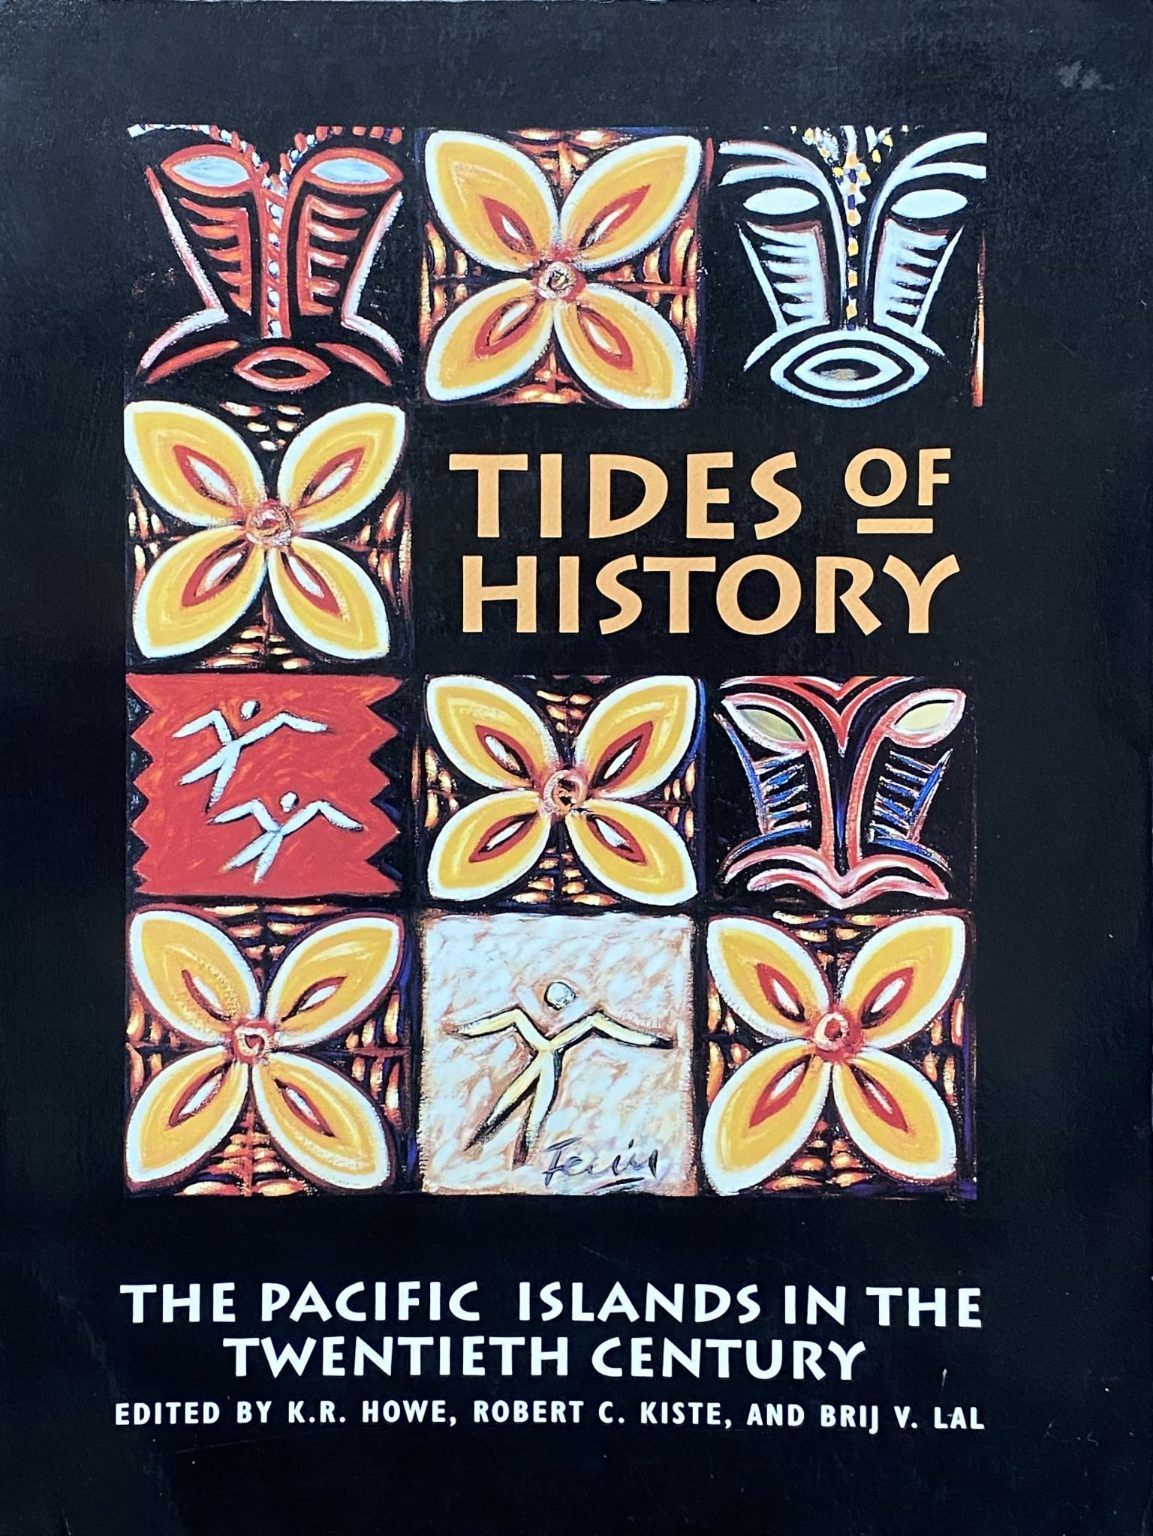 TIDES OF HISTORY: The Pacific Islands in the Twentieth Century